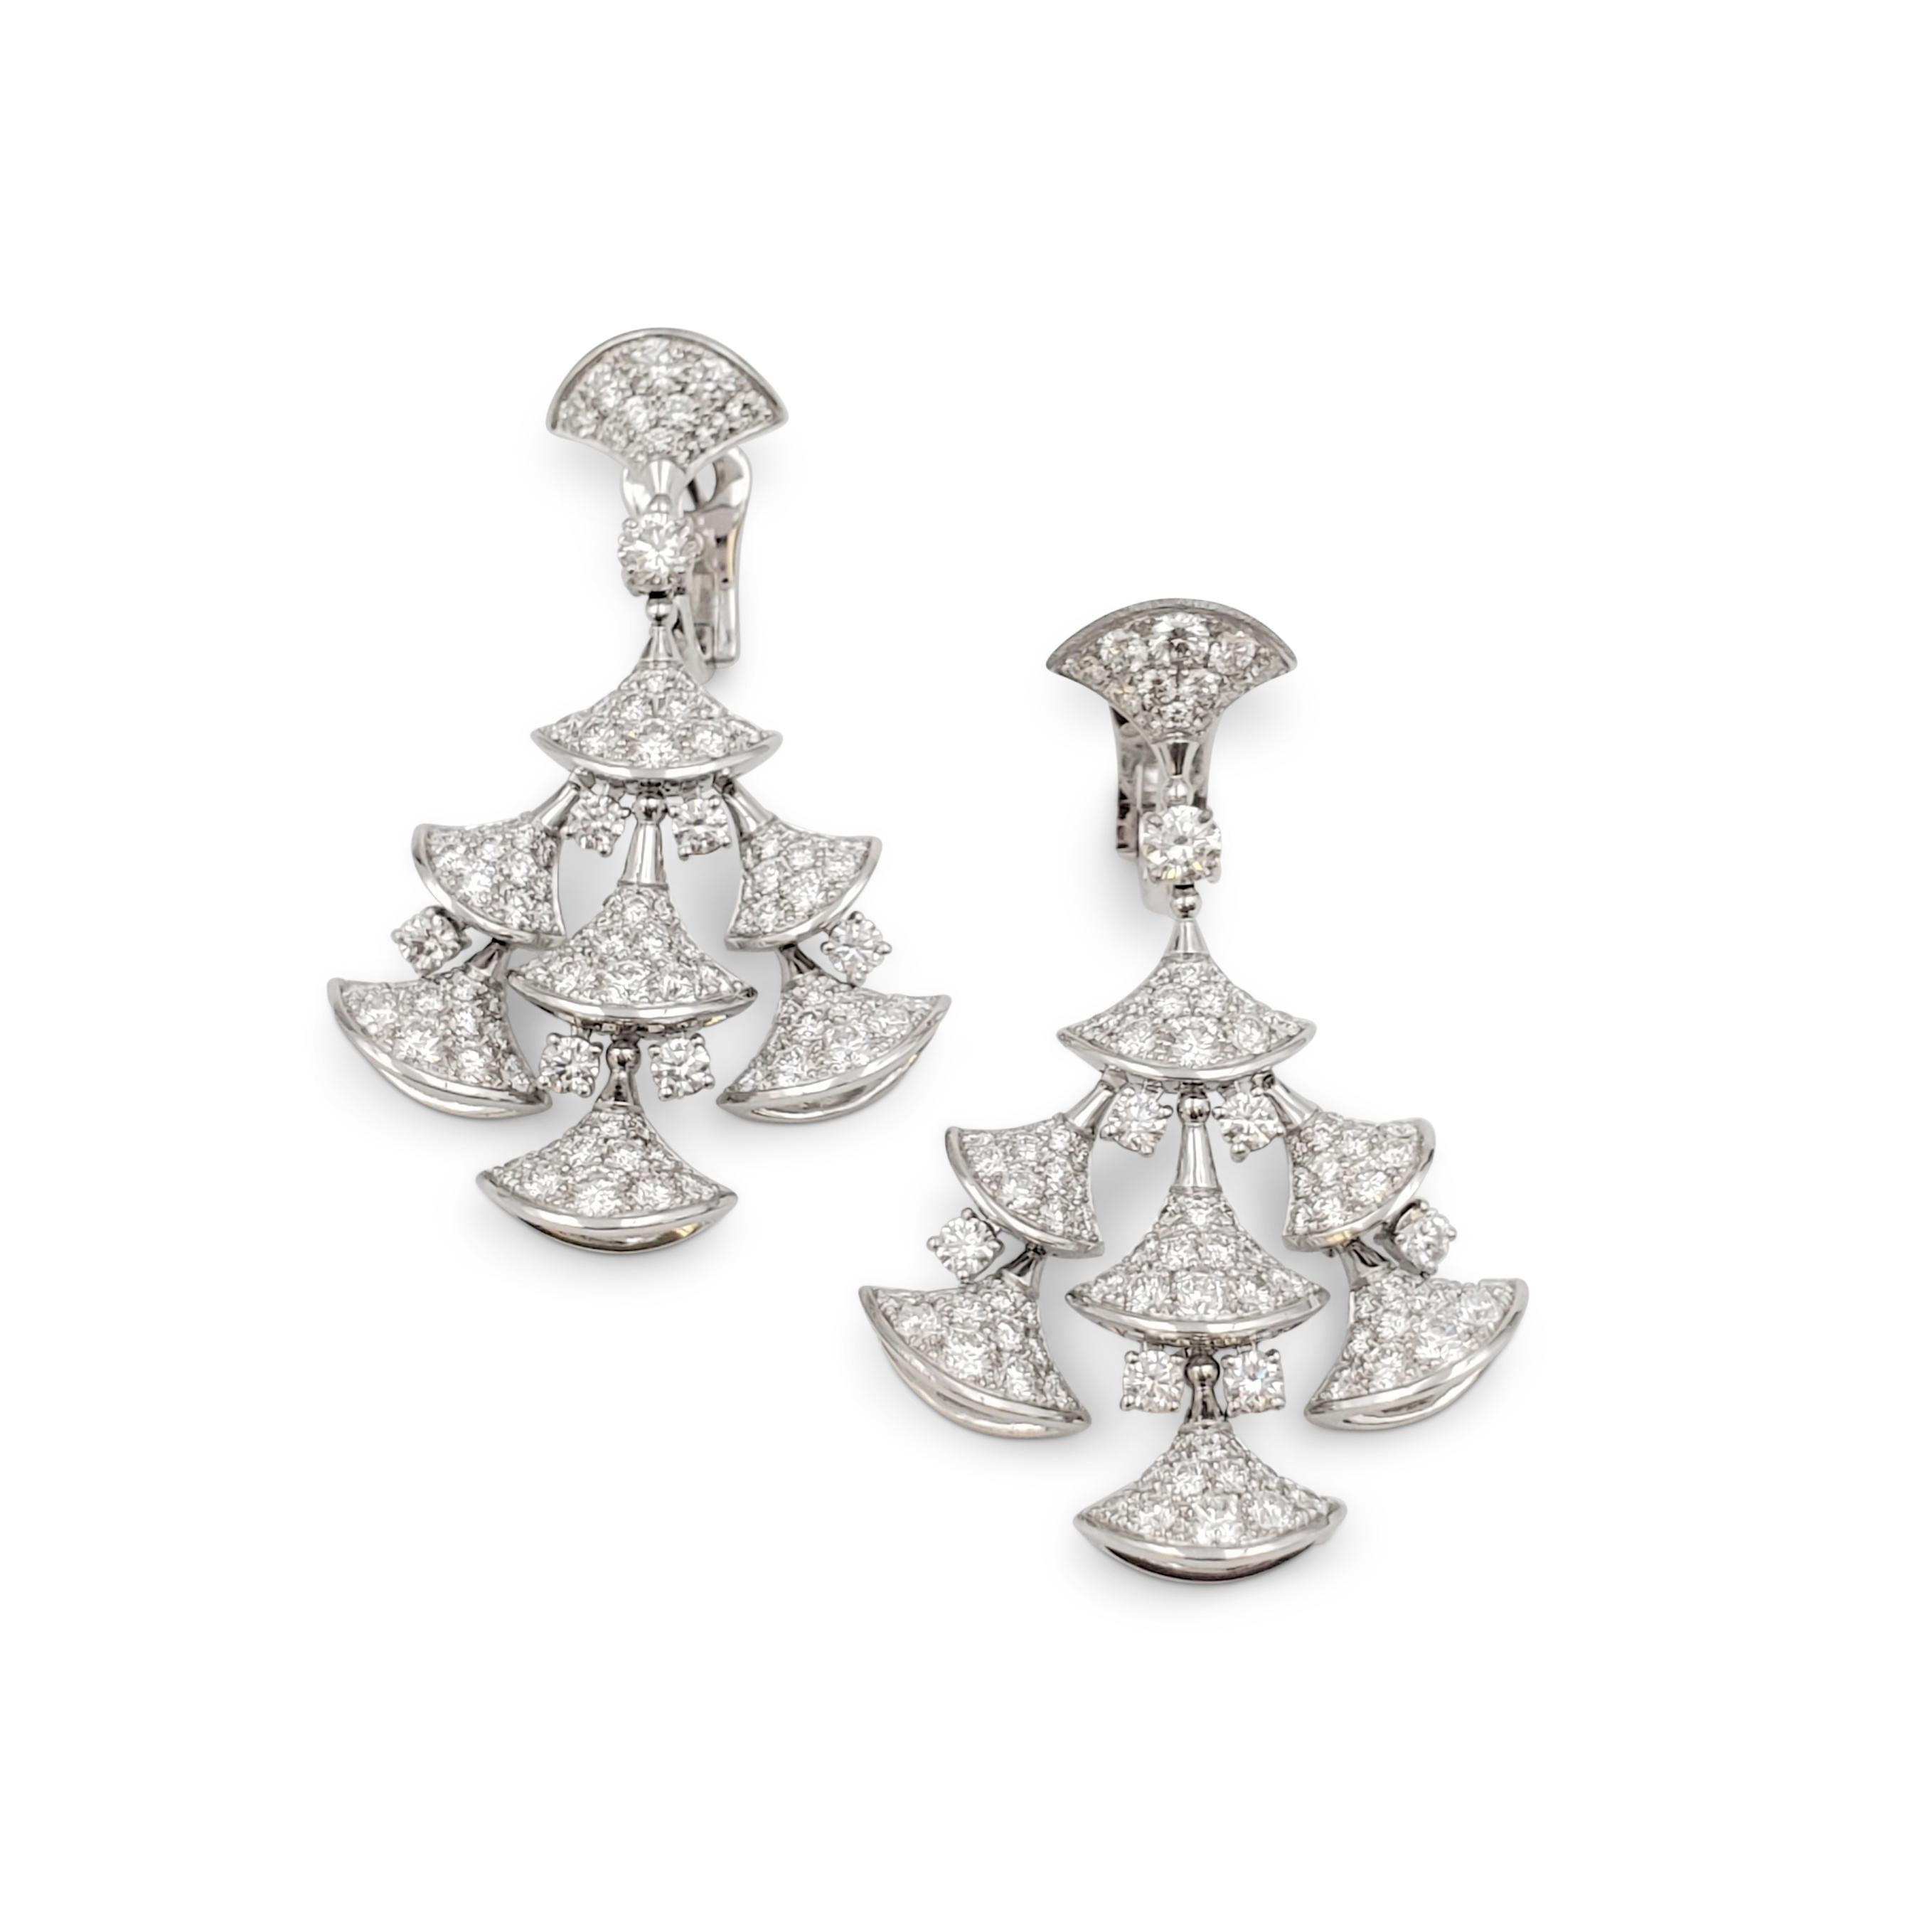 Authentic glamourous Bvlgari earrings from the 'Divas' Dream' collection center on dancing fan-shaped elements crafted in 18 karat white gold and set with an estimated 7.94 carats of high-quality round brilliant cut diamonds (E-F, VS). Signed